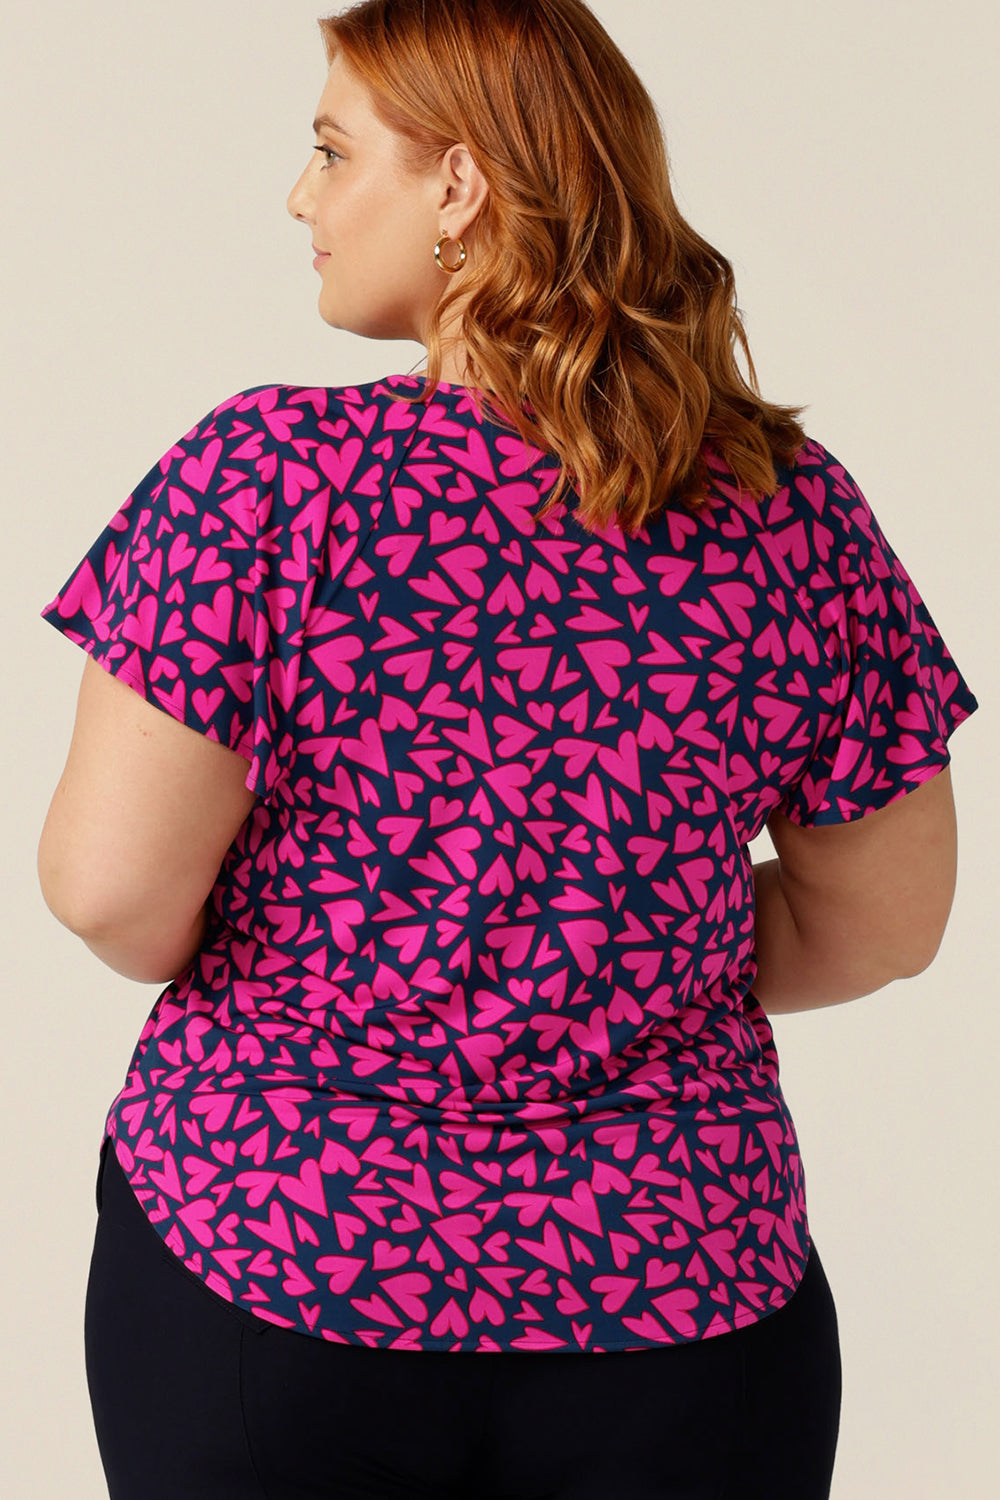 A plus size, size 18 woman wears a casual jersey top. The top has short raglan sleeves, a V-neckline and is printed with pink hearts for a Valentines Day fashion look. 